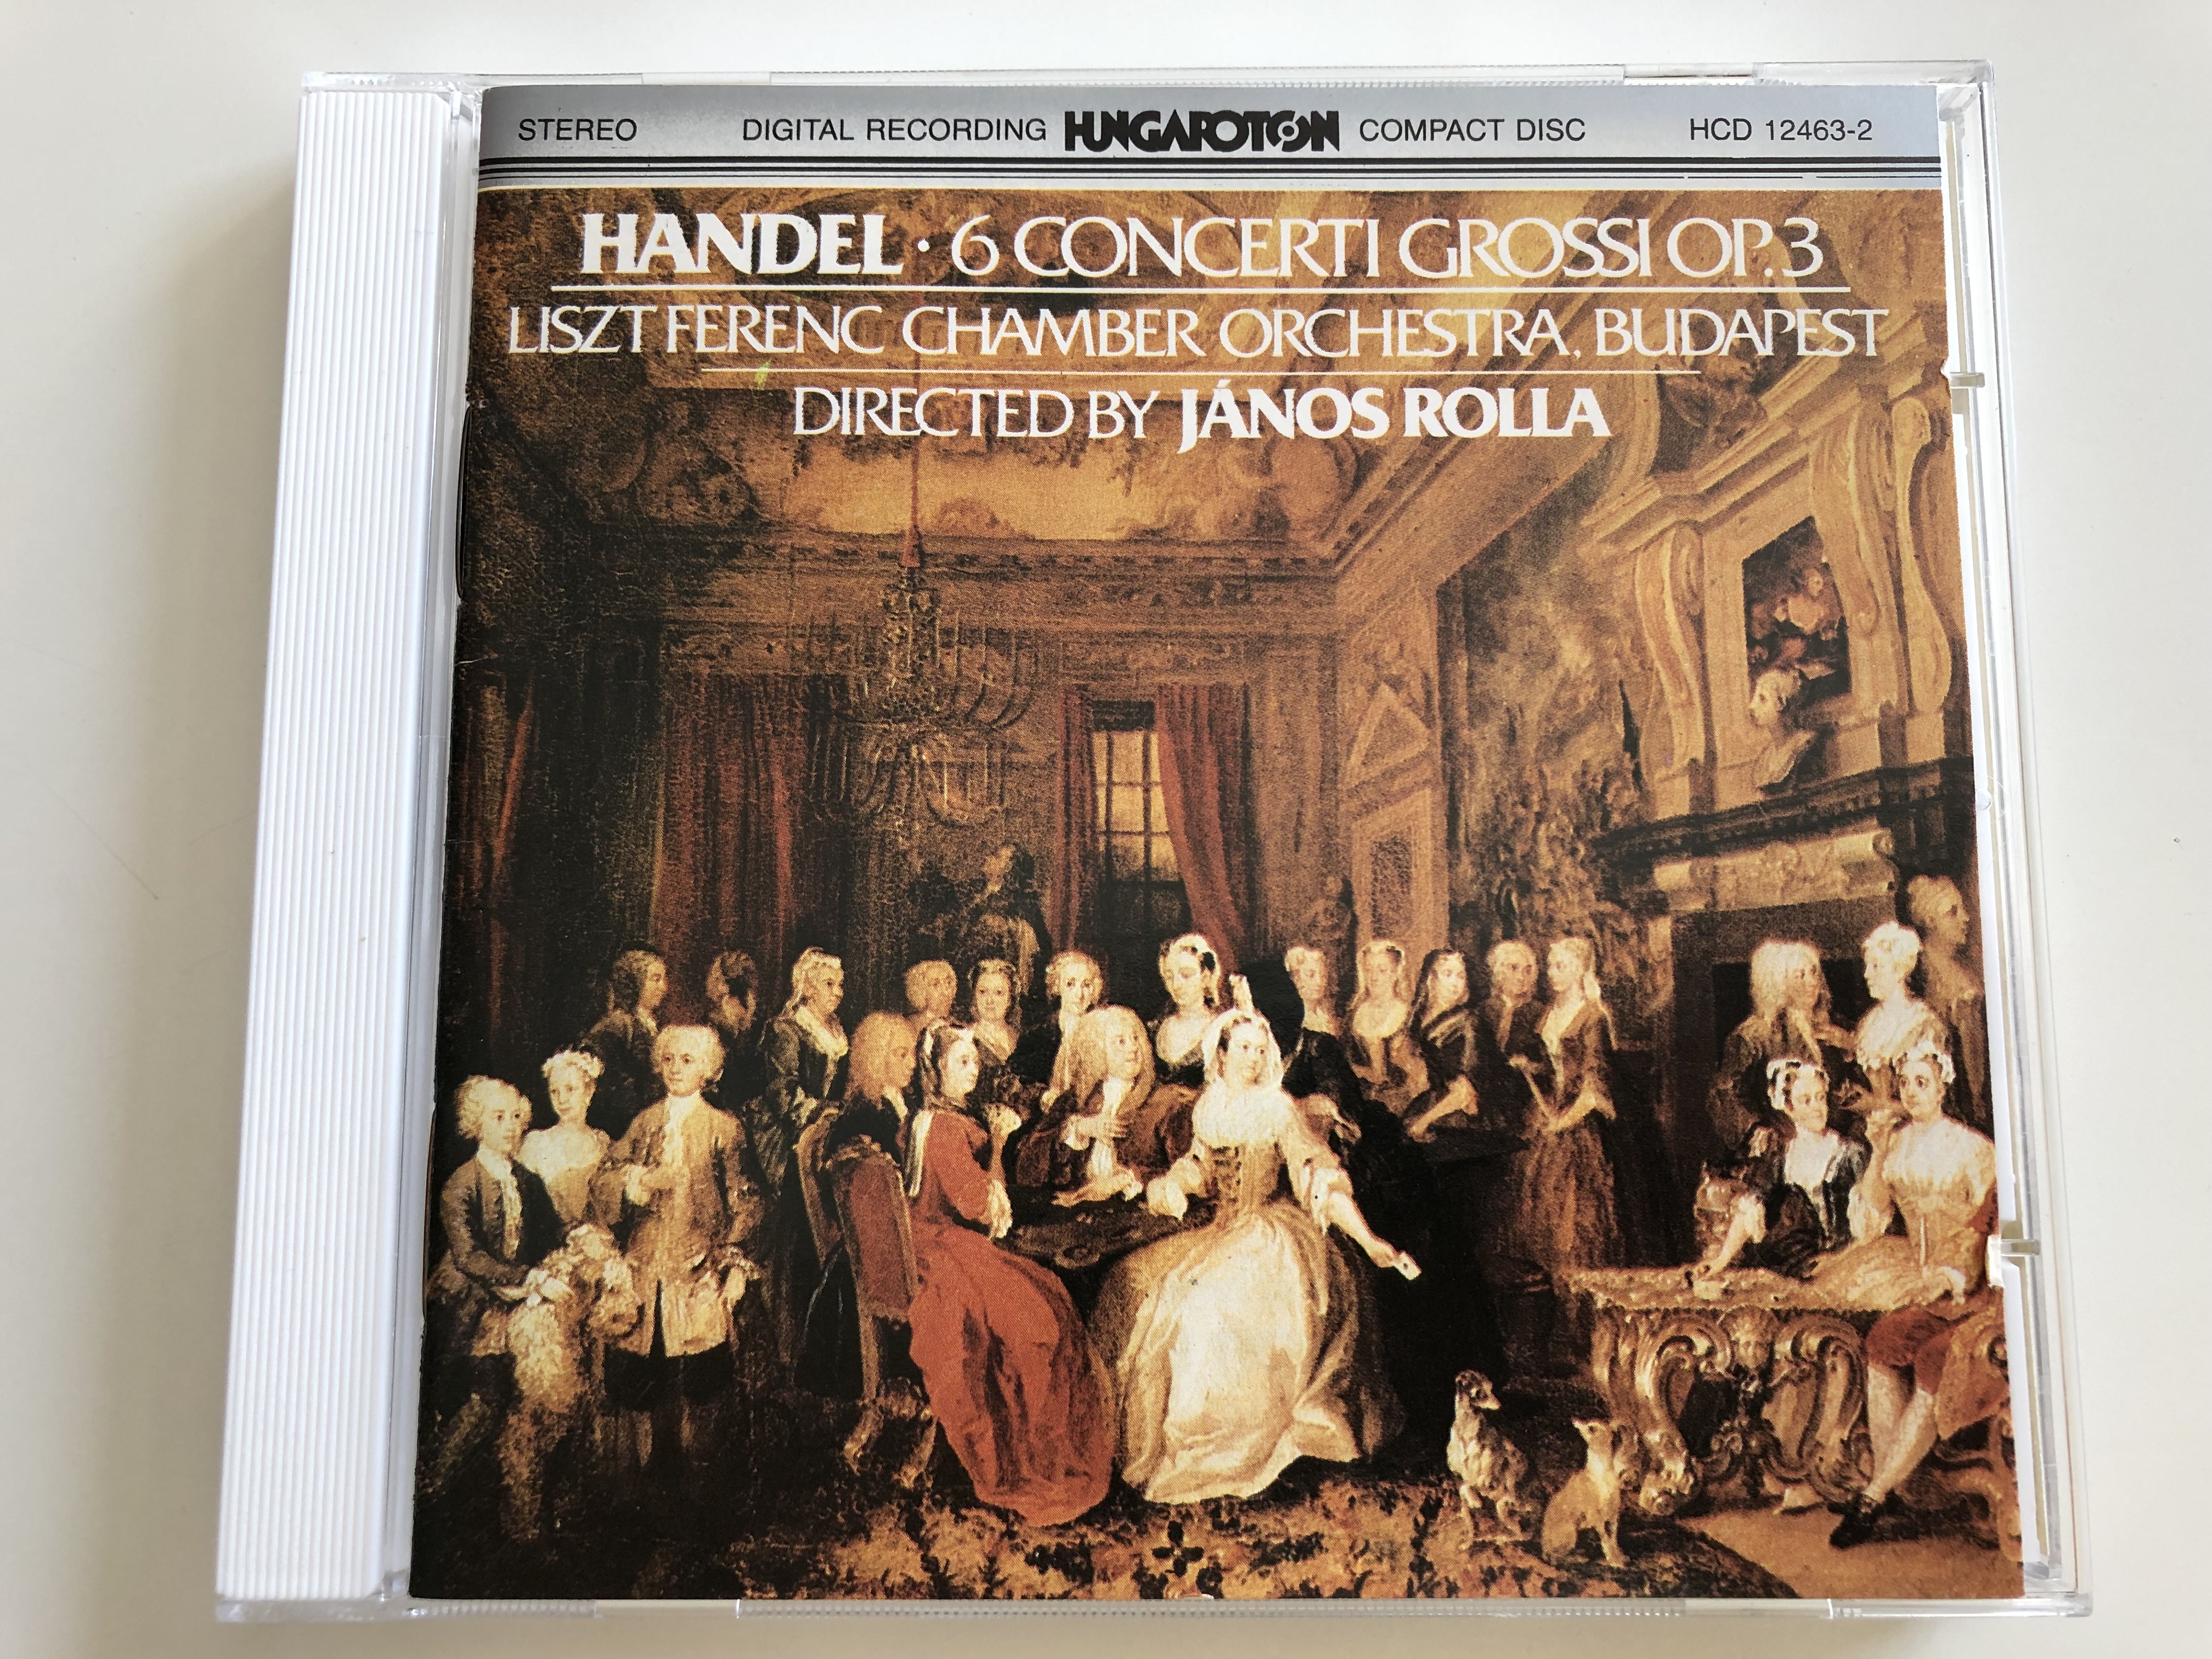 handel-6-concerti-grossi-from-op.3-liszt-ferenc-chamber-orchestra-budapest-conducted-by-j-nos-rolla-hungaroton-audio-cd-1984-hcd-12463-2-1-.jpg